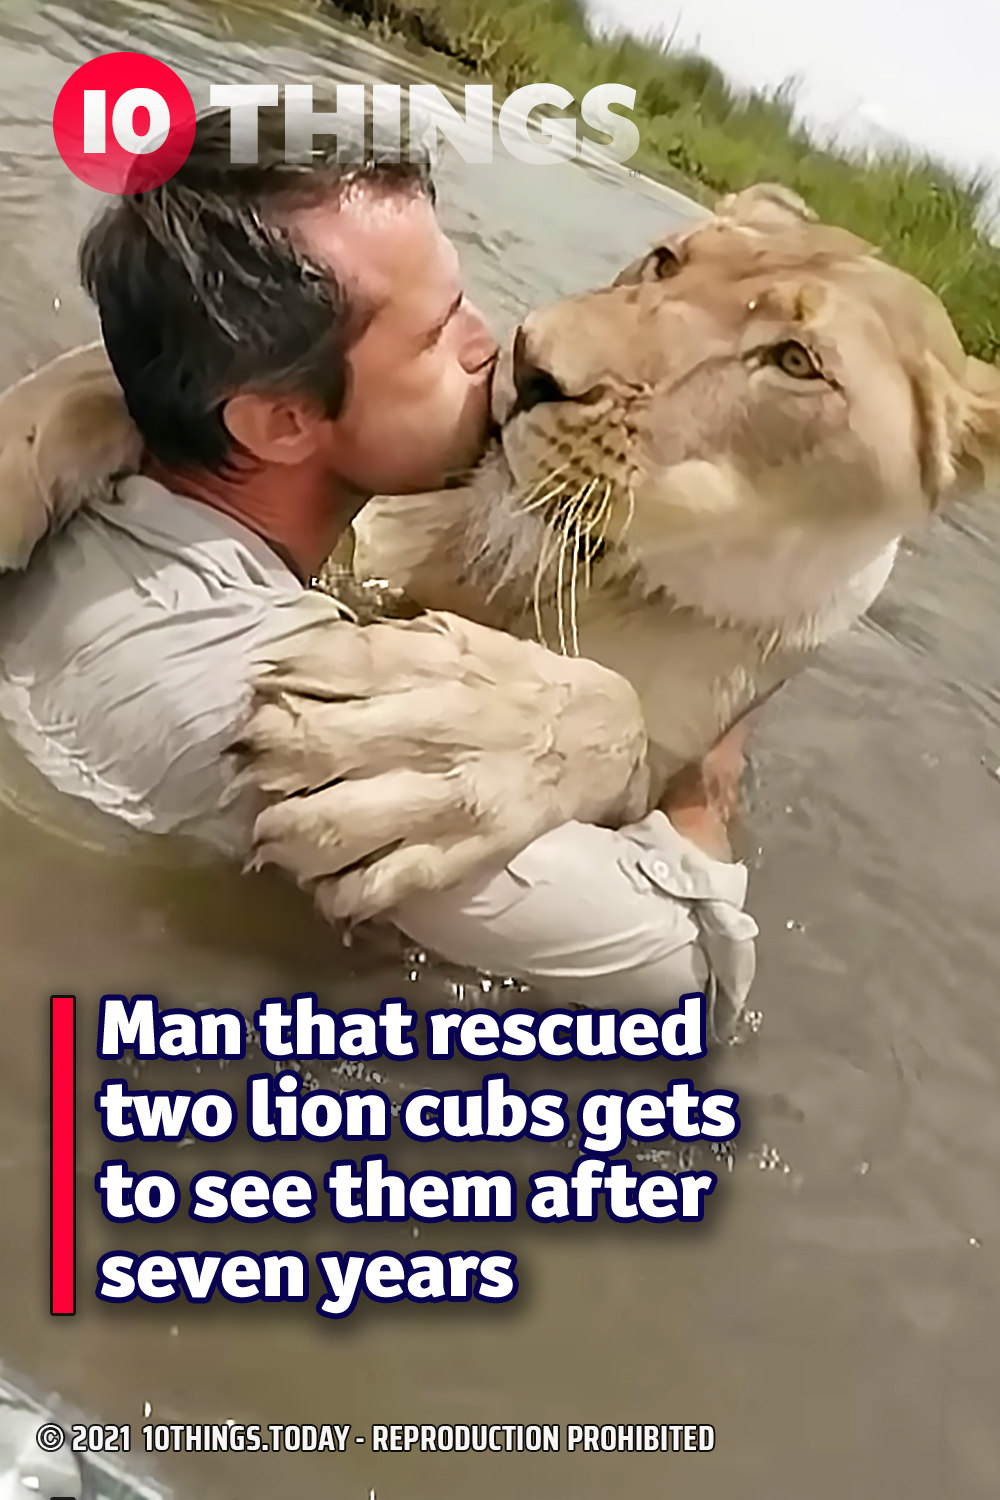 Man that rescued two lion cubs gets to see them after seven years